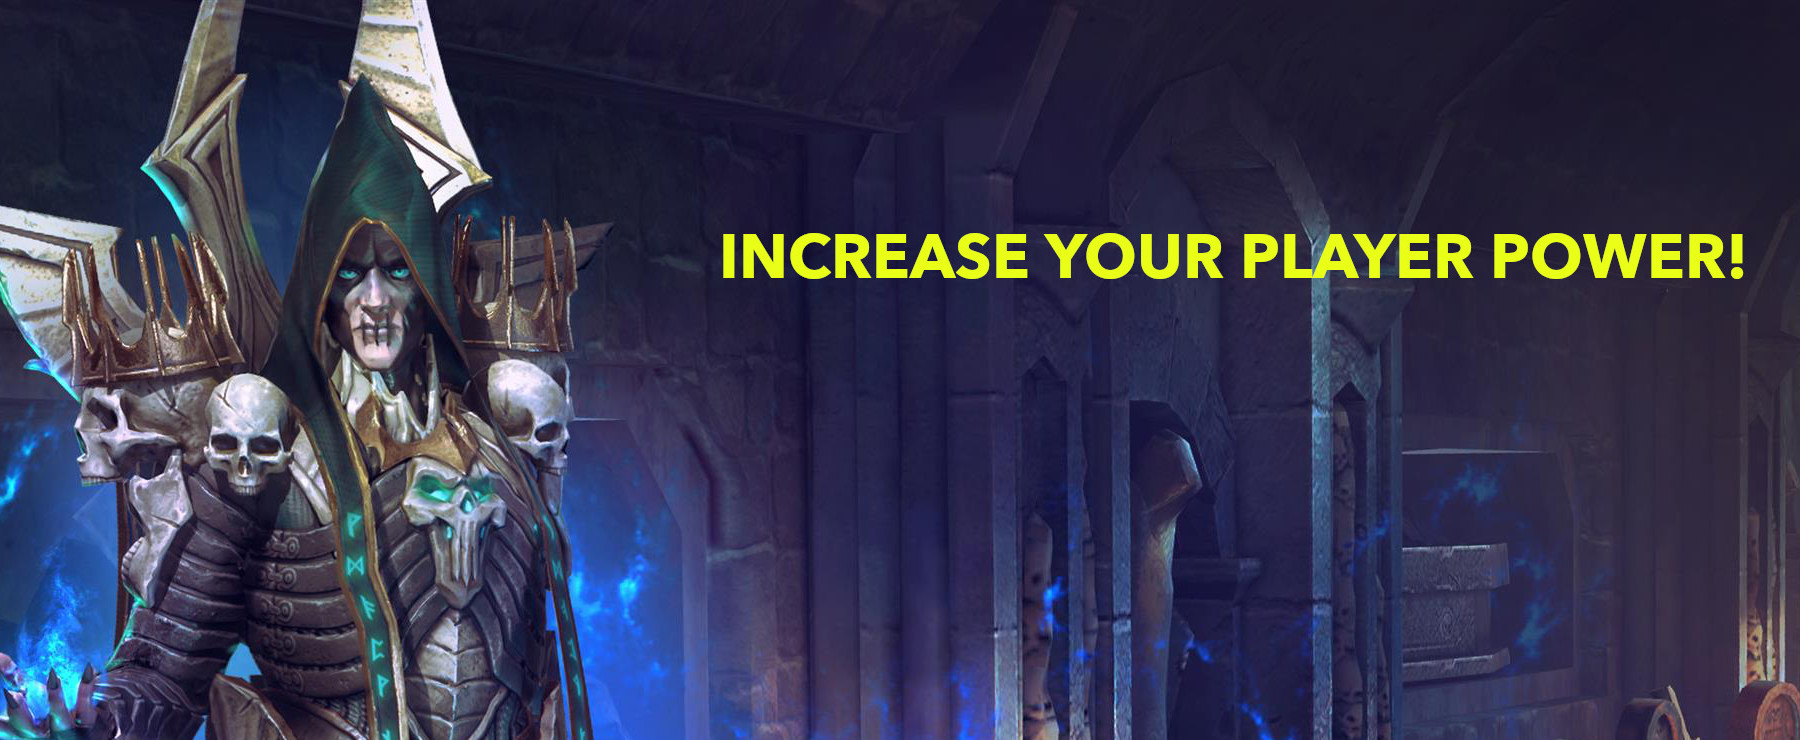 Increasing your Player Power